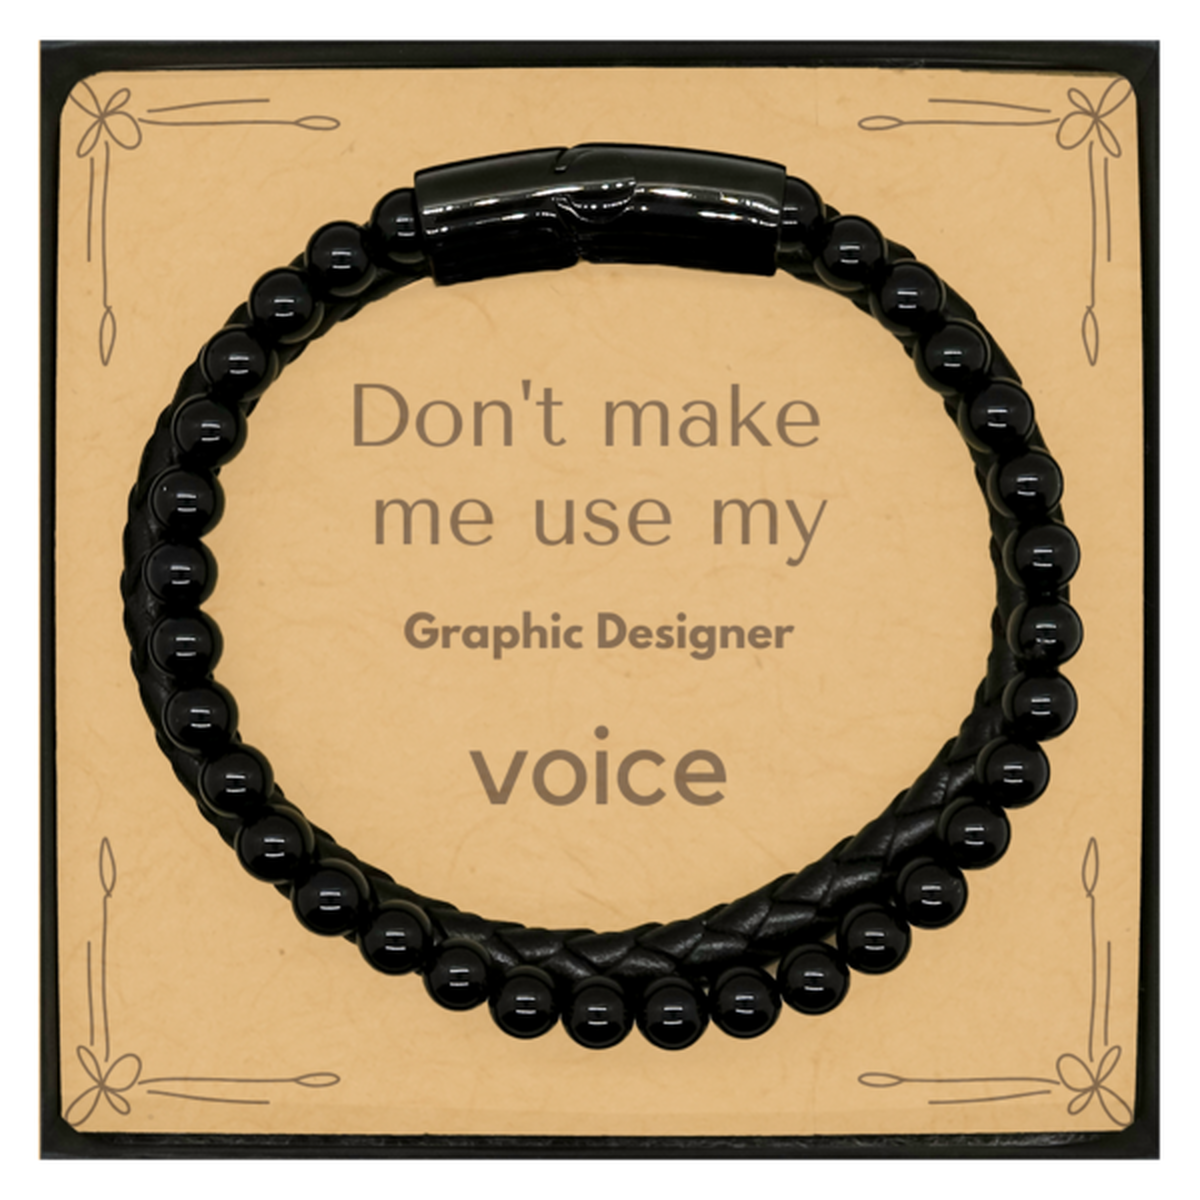 Don't make me use my Graphic Designer voice, Sarcasm Graphic Designer Card Gifts, Christmas Graphic Designer Stone Leather Bracelets Birthday Unique Gifts For Graphic Designer Coworkers, Men, Women, Colleague, Friends